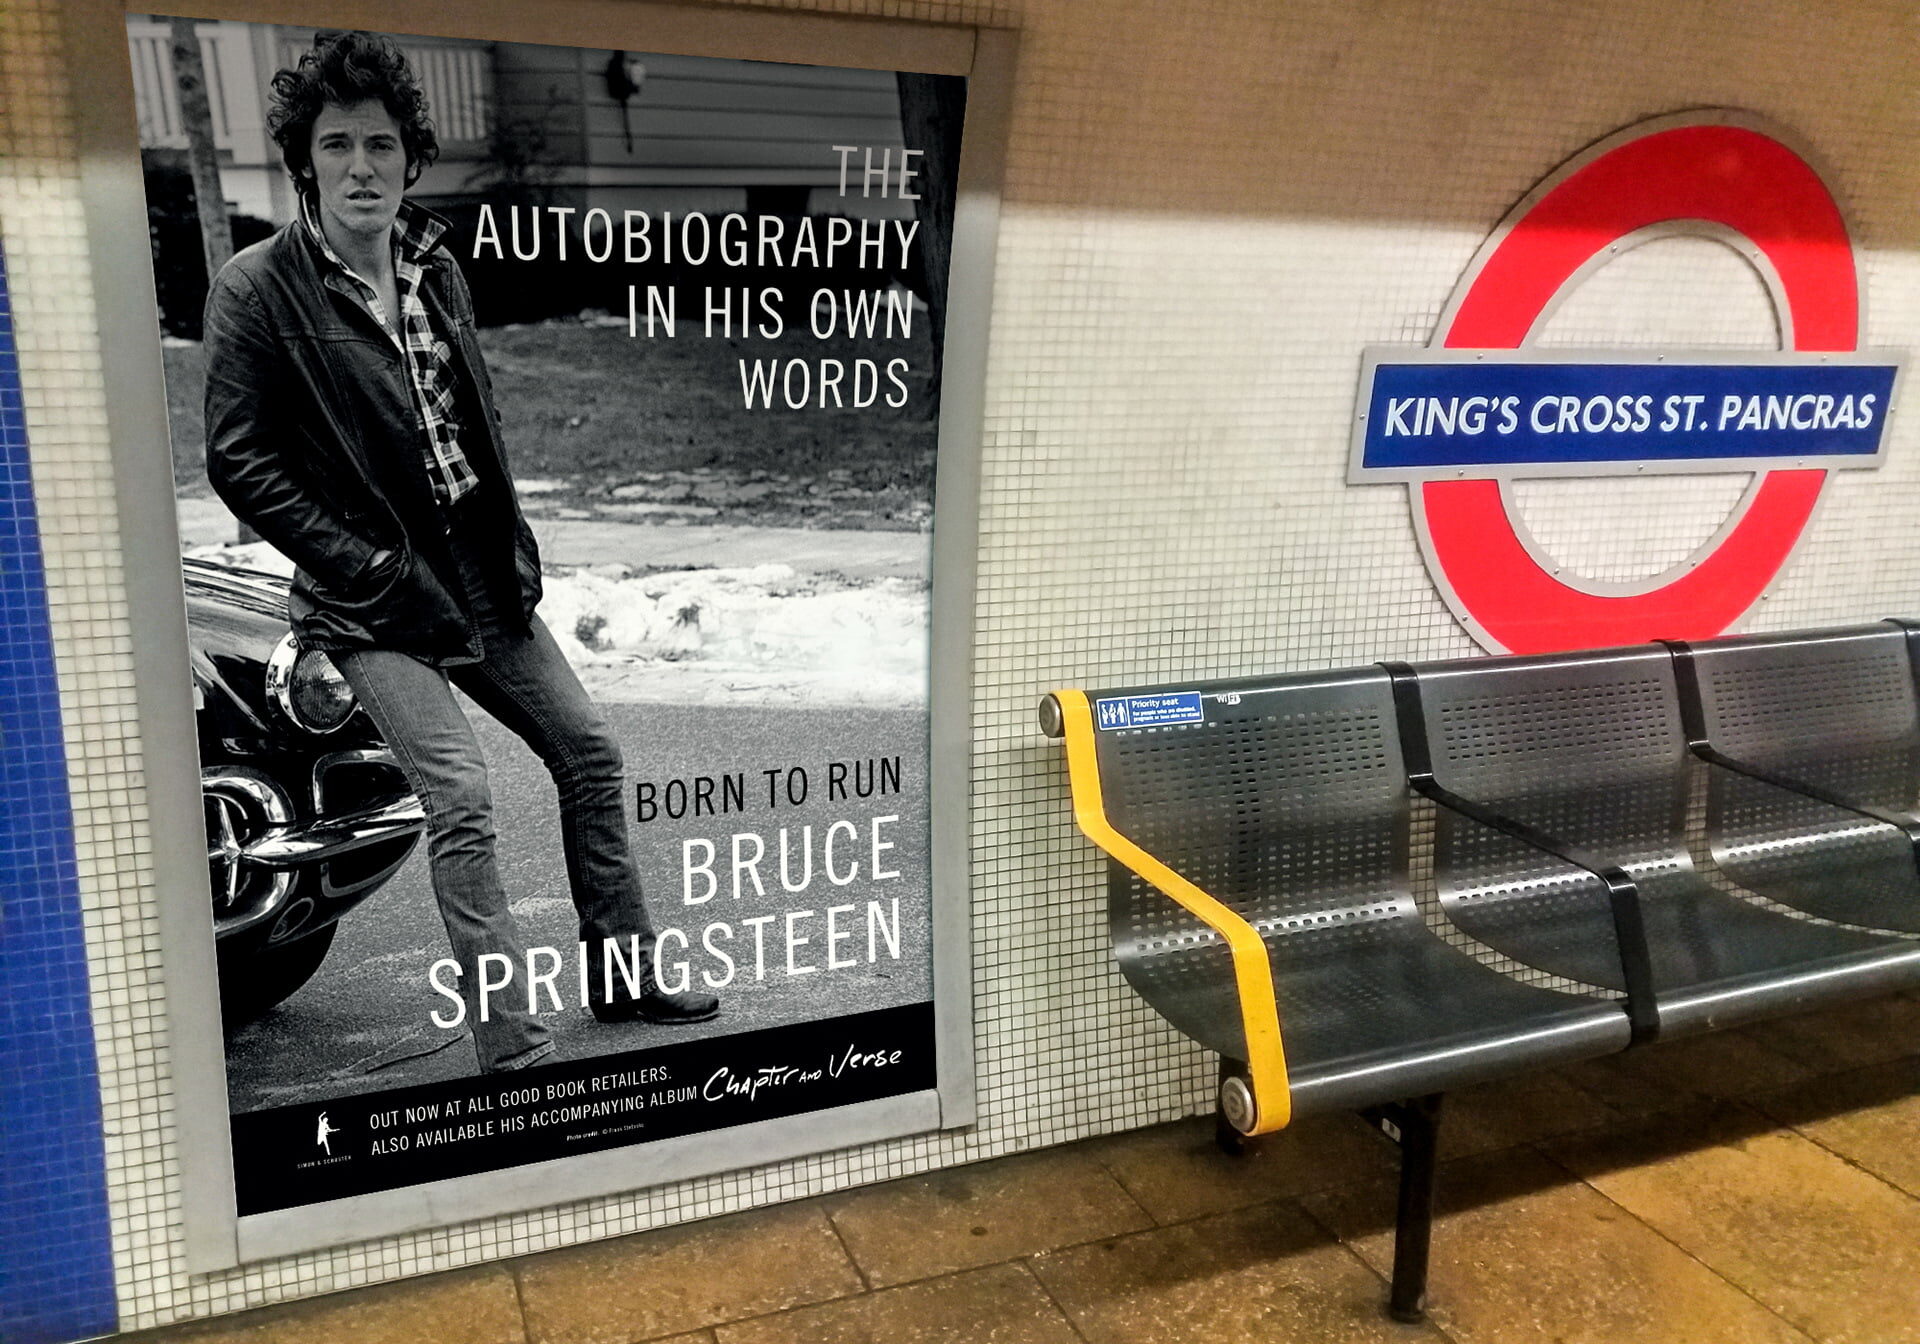 An advert for Bruce Springsteen displayed on the London Underground using 4 Sheet posters. This is at King's Cross St Pancras station.